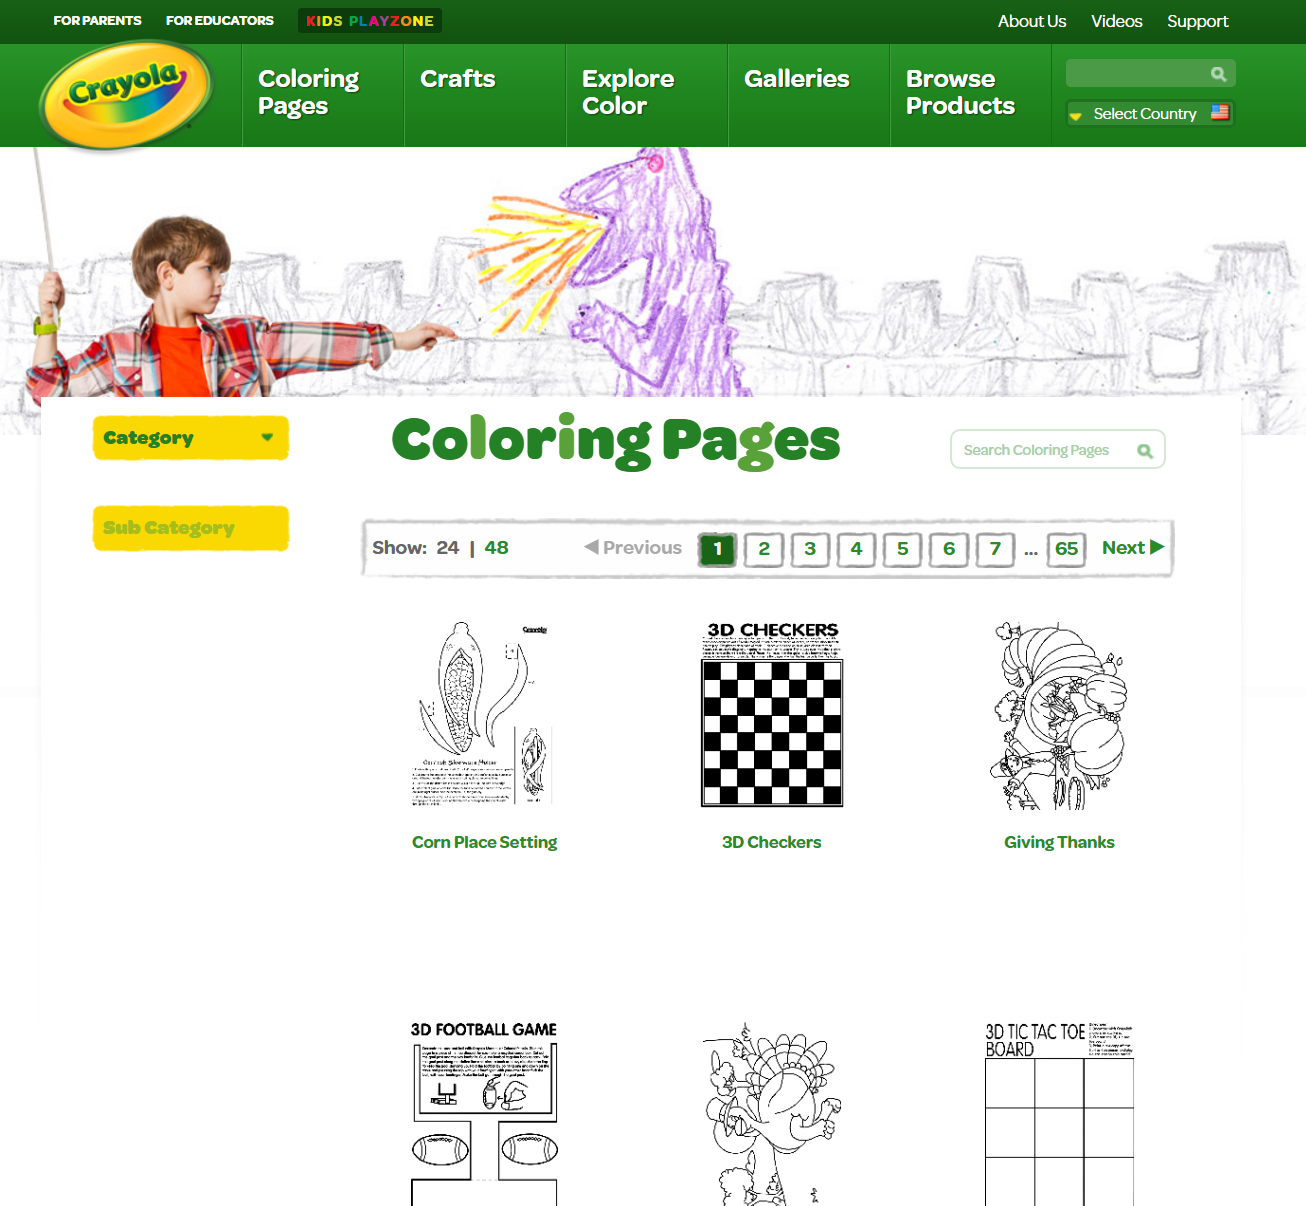 Free Colouring Pages from Crayola | Freebies.co.nz